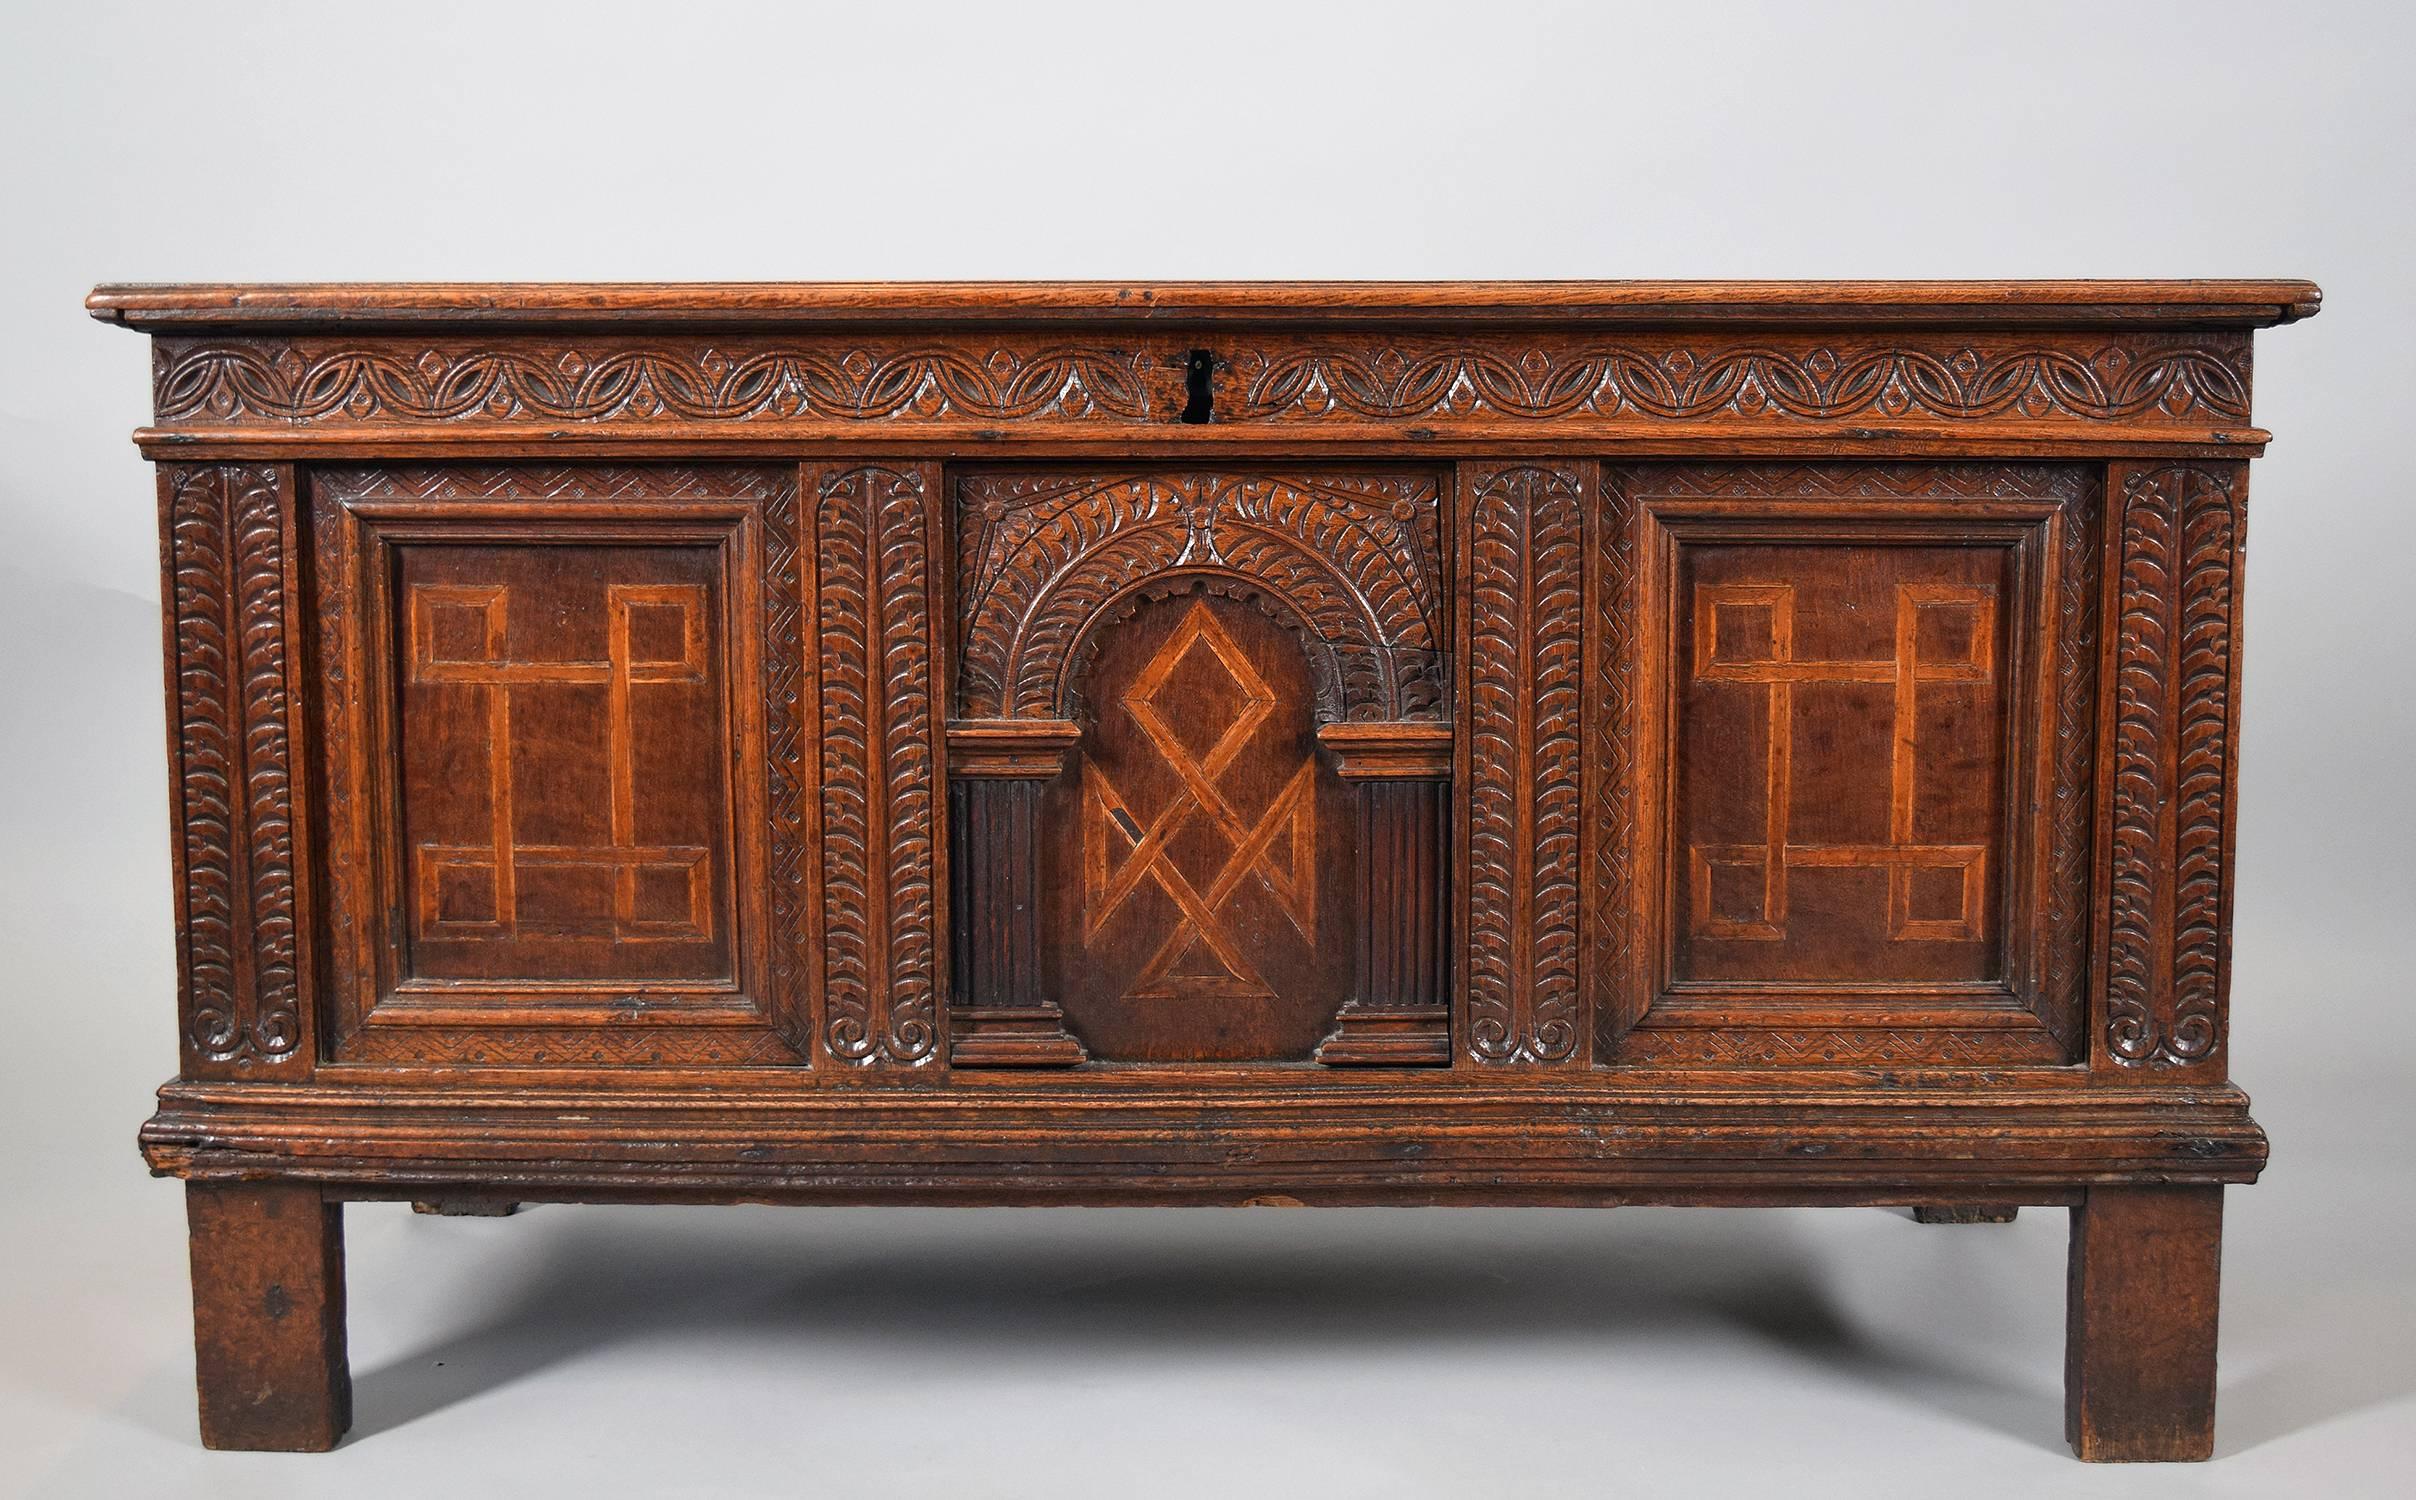 The rectangular molded top above a front carved with an arch and stylized foliage with inlaid panels, the sides also panelled, raised on rectangular feet

Provenance: Roundwood Manor, Hunting Valley, Ohio.